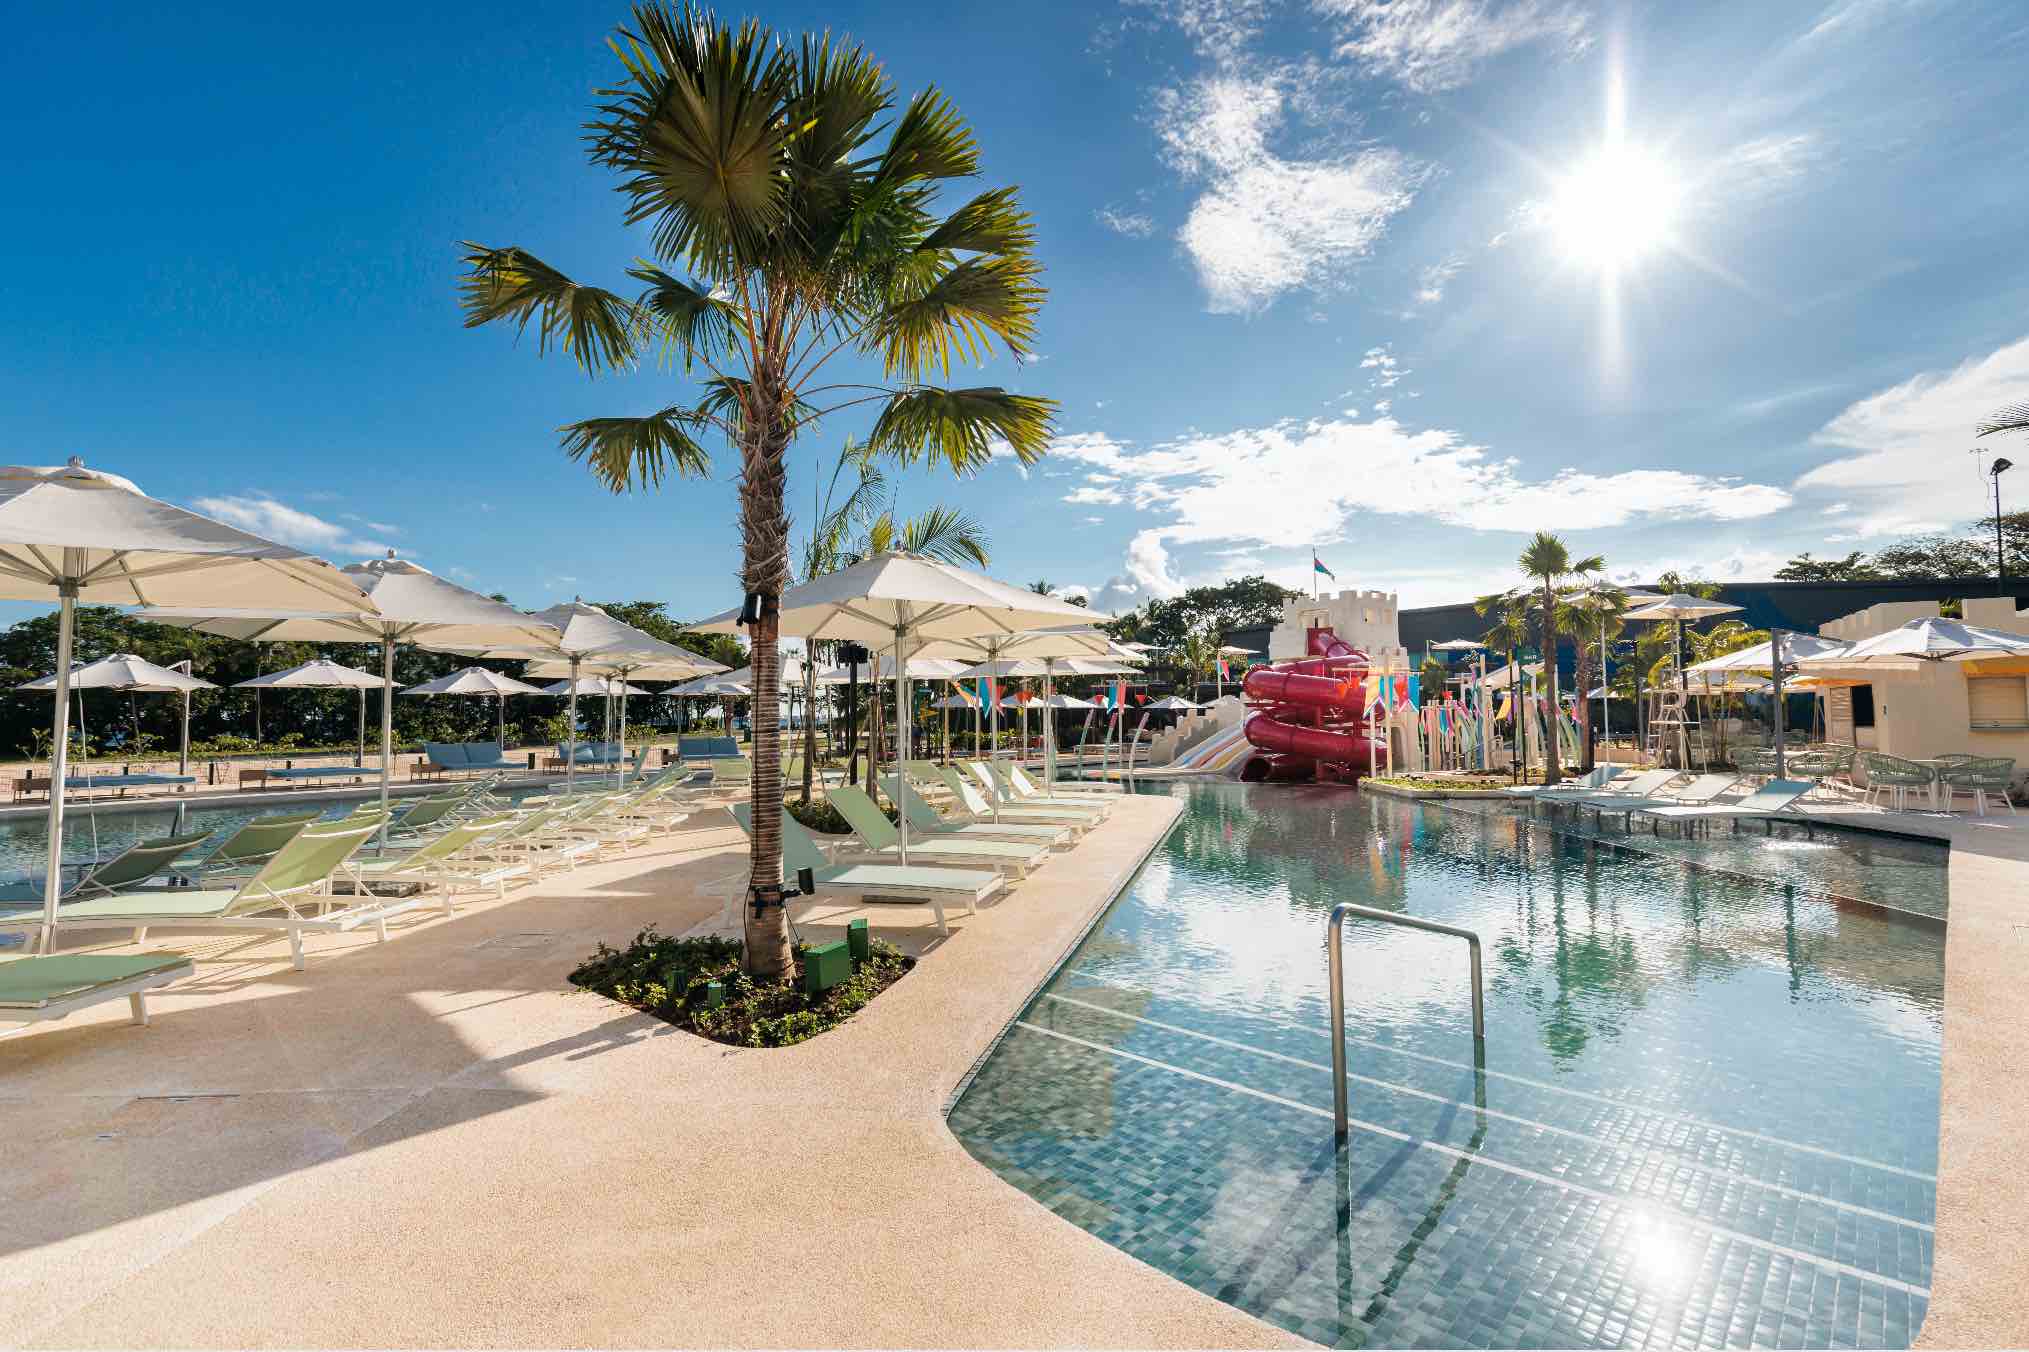 , Island of fun: Sentosa launches new lifestyle precinct and state-of-the-art beach clubs